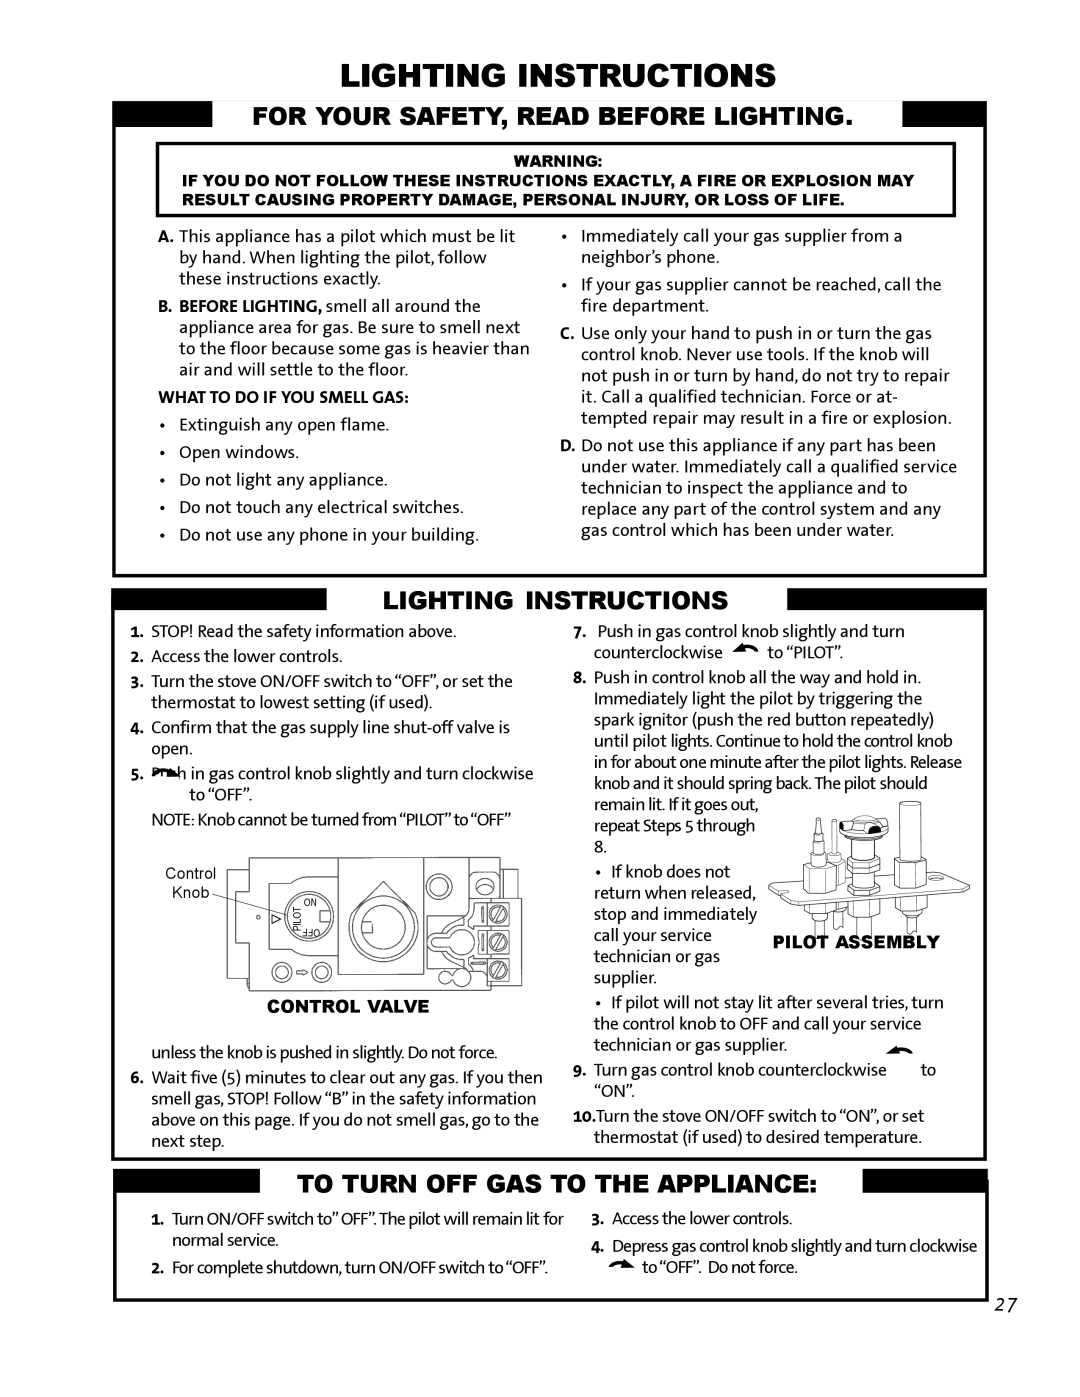 Jotul GF 200 DV manual Lighting Instructions, For Your Safety, Read Before Lighting, To Turn Off Gas To The Appliance 